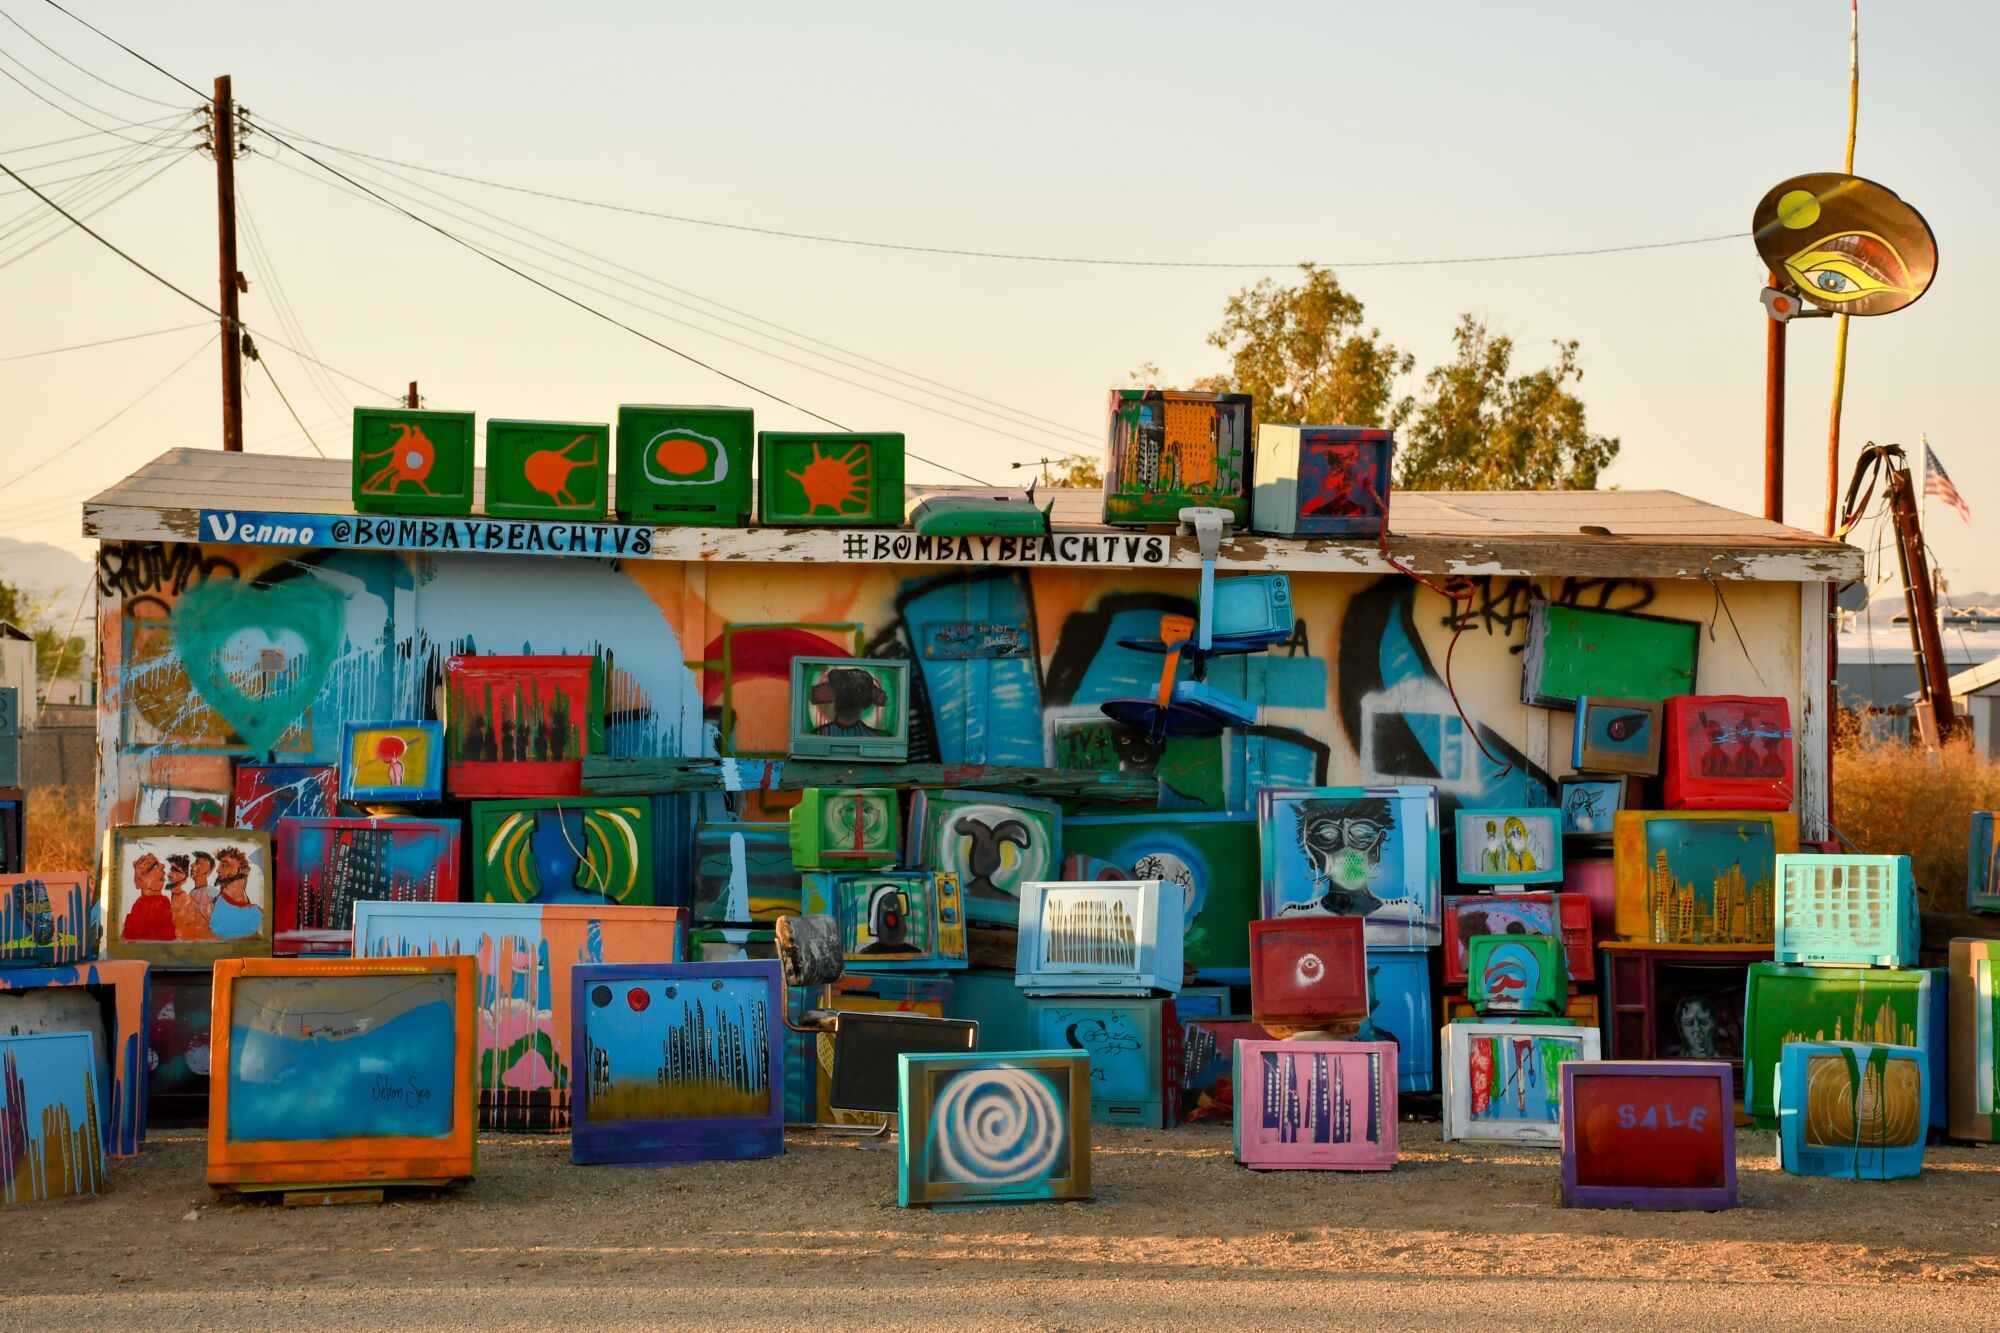 A variety of painted televisions in Bombay Beach.